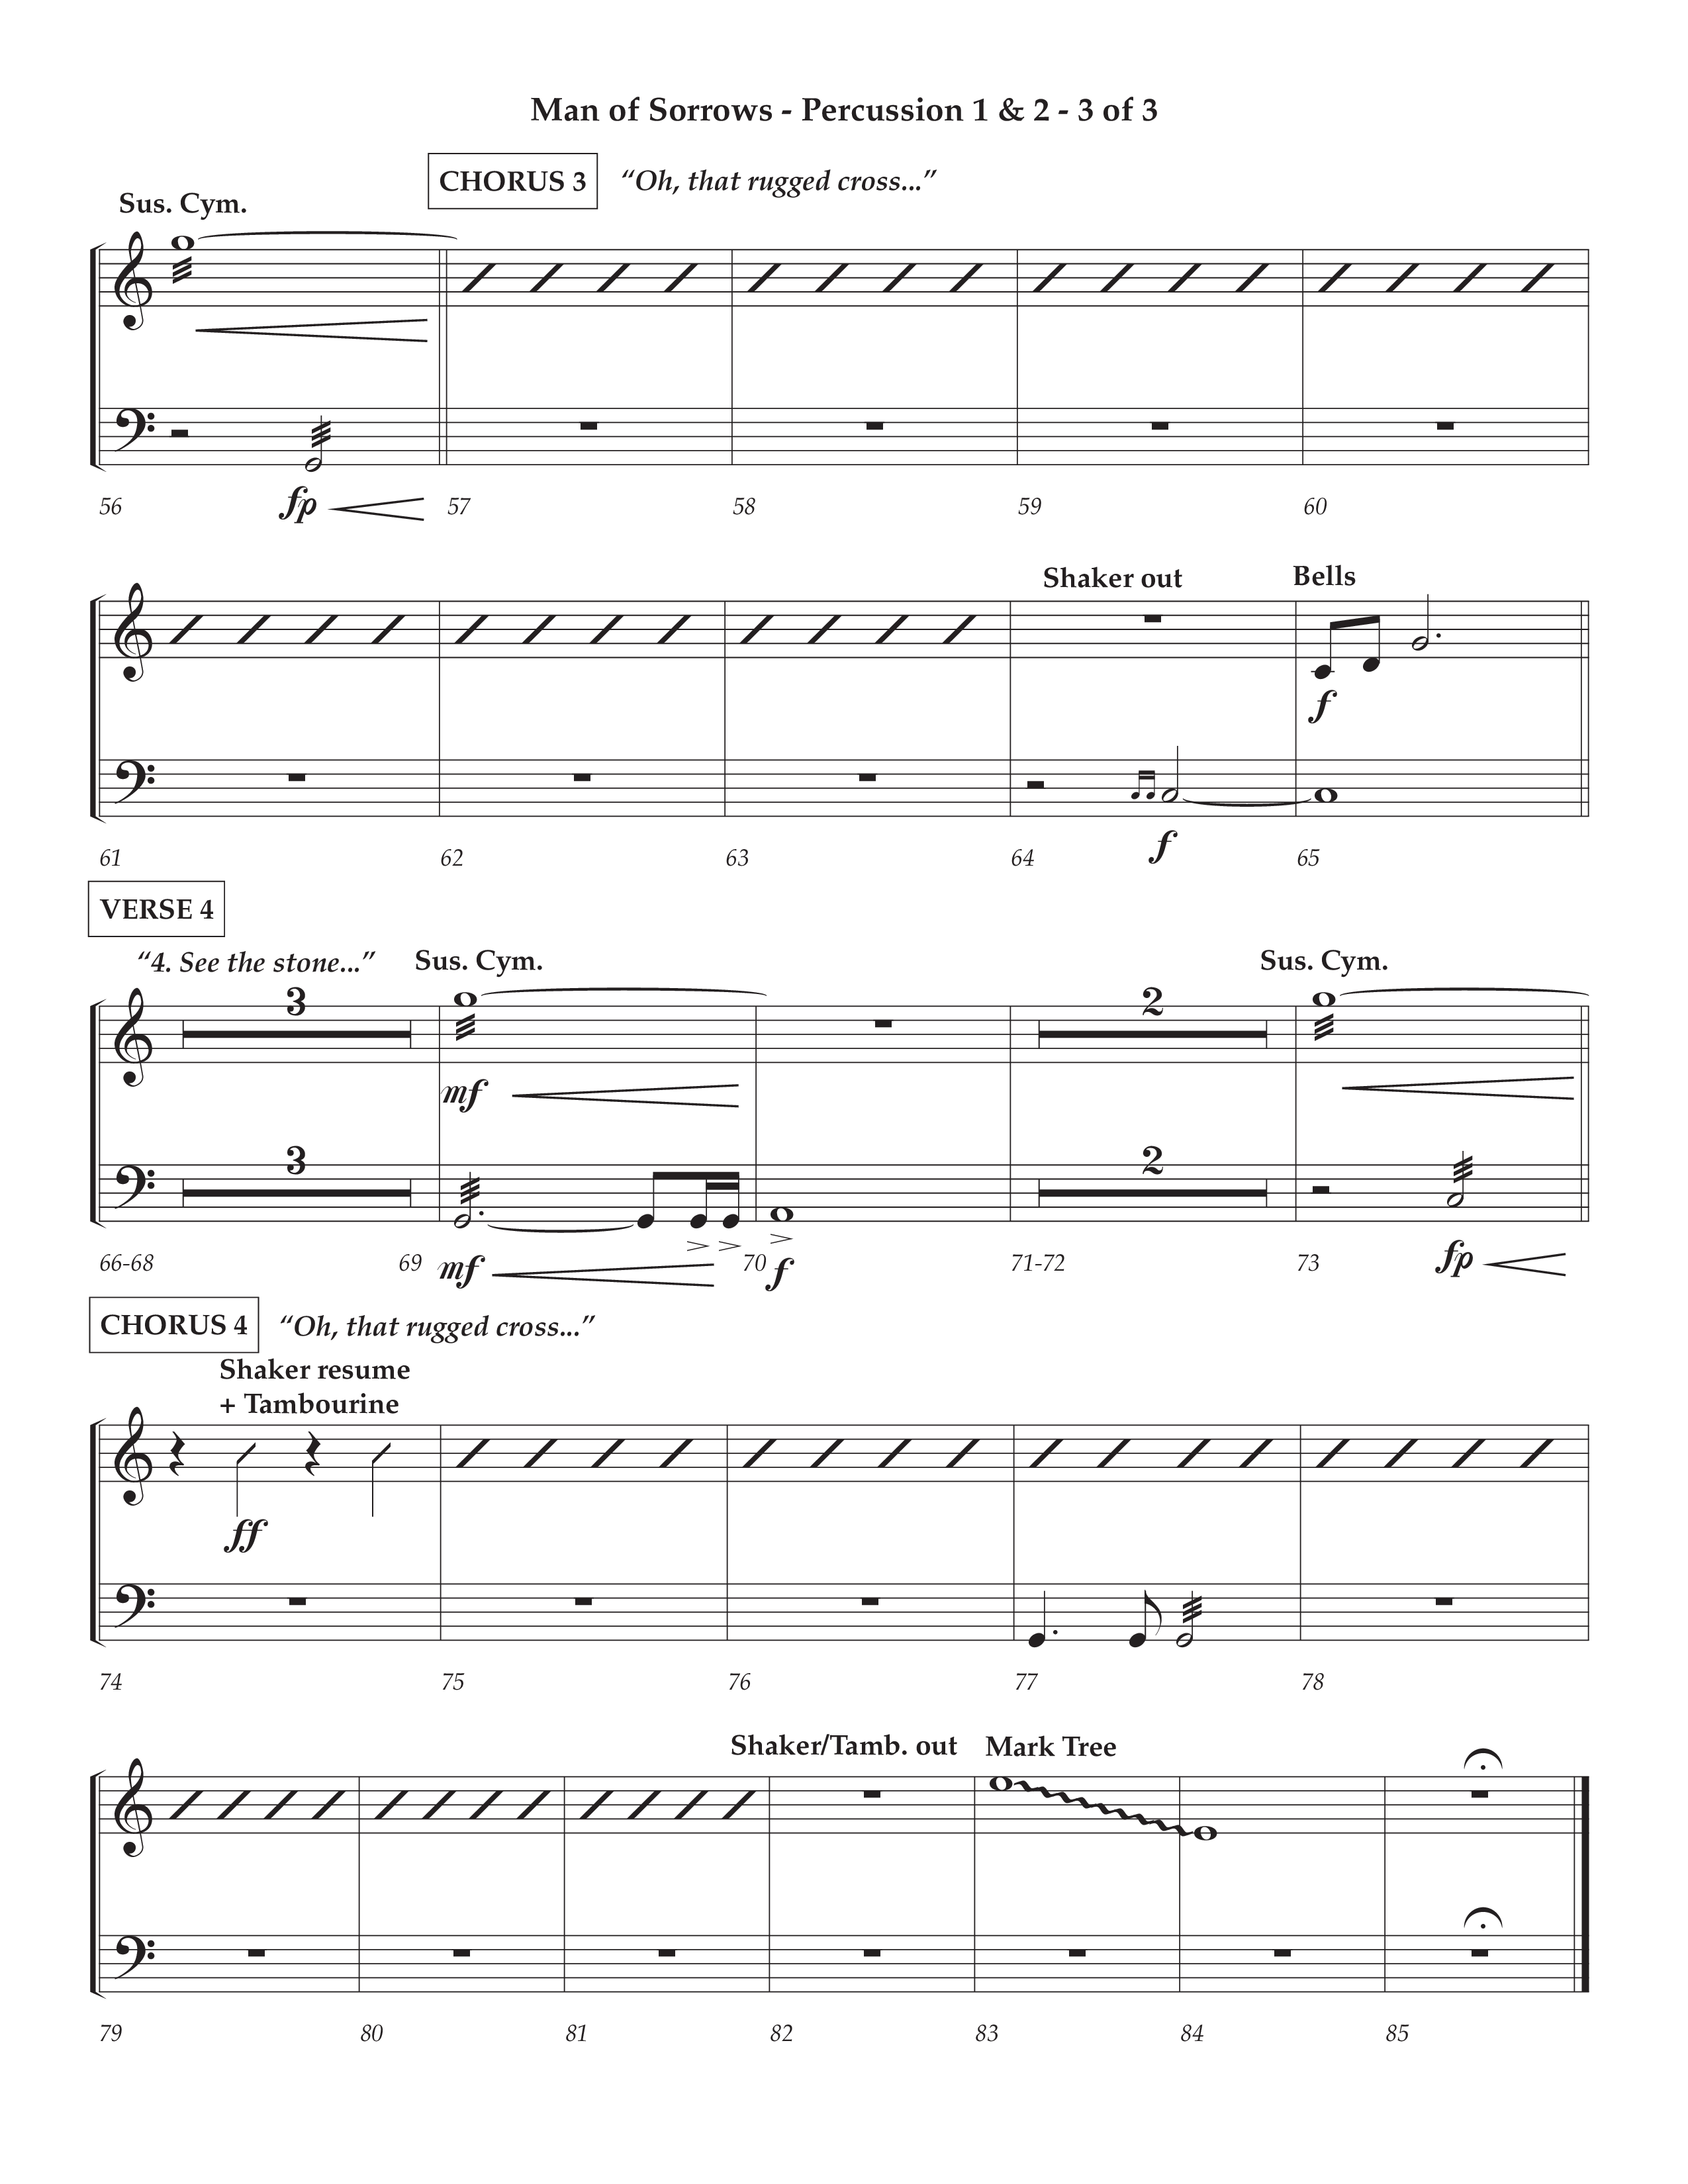 Man Of Sorrows (Choral Anthem SATB) Percussion 1/2 (Lifeway Choral / Arr. Cliff Duren / Orch. Keith Christopher)